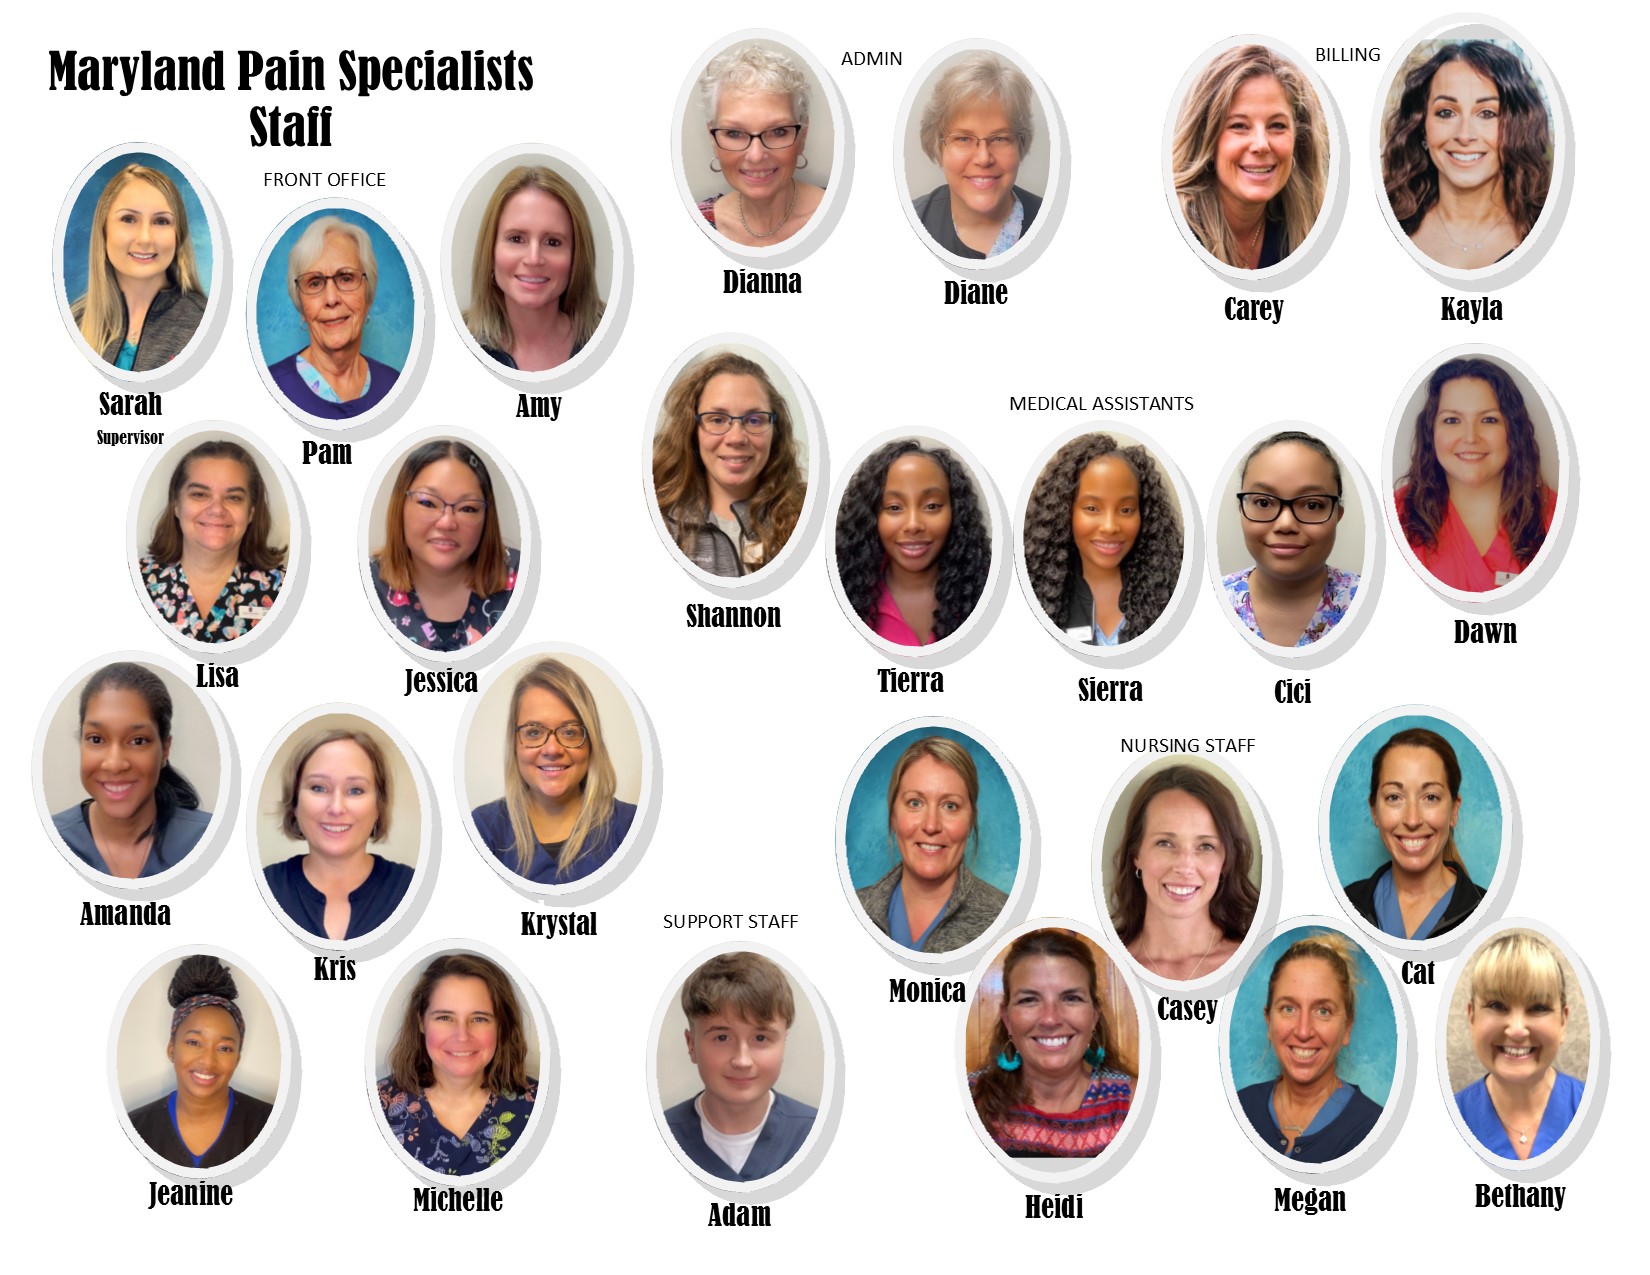 Staff at Maryland Pain Specialists